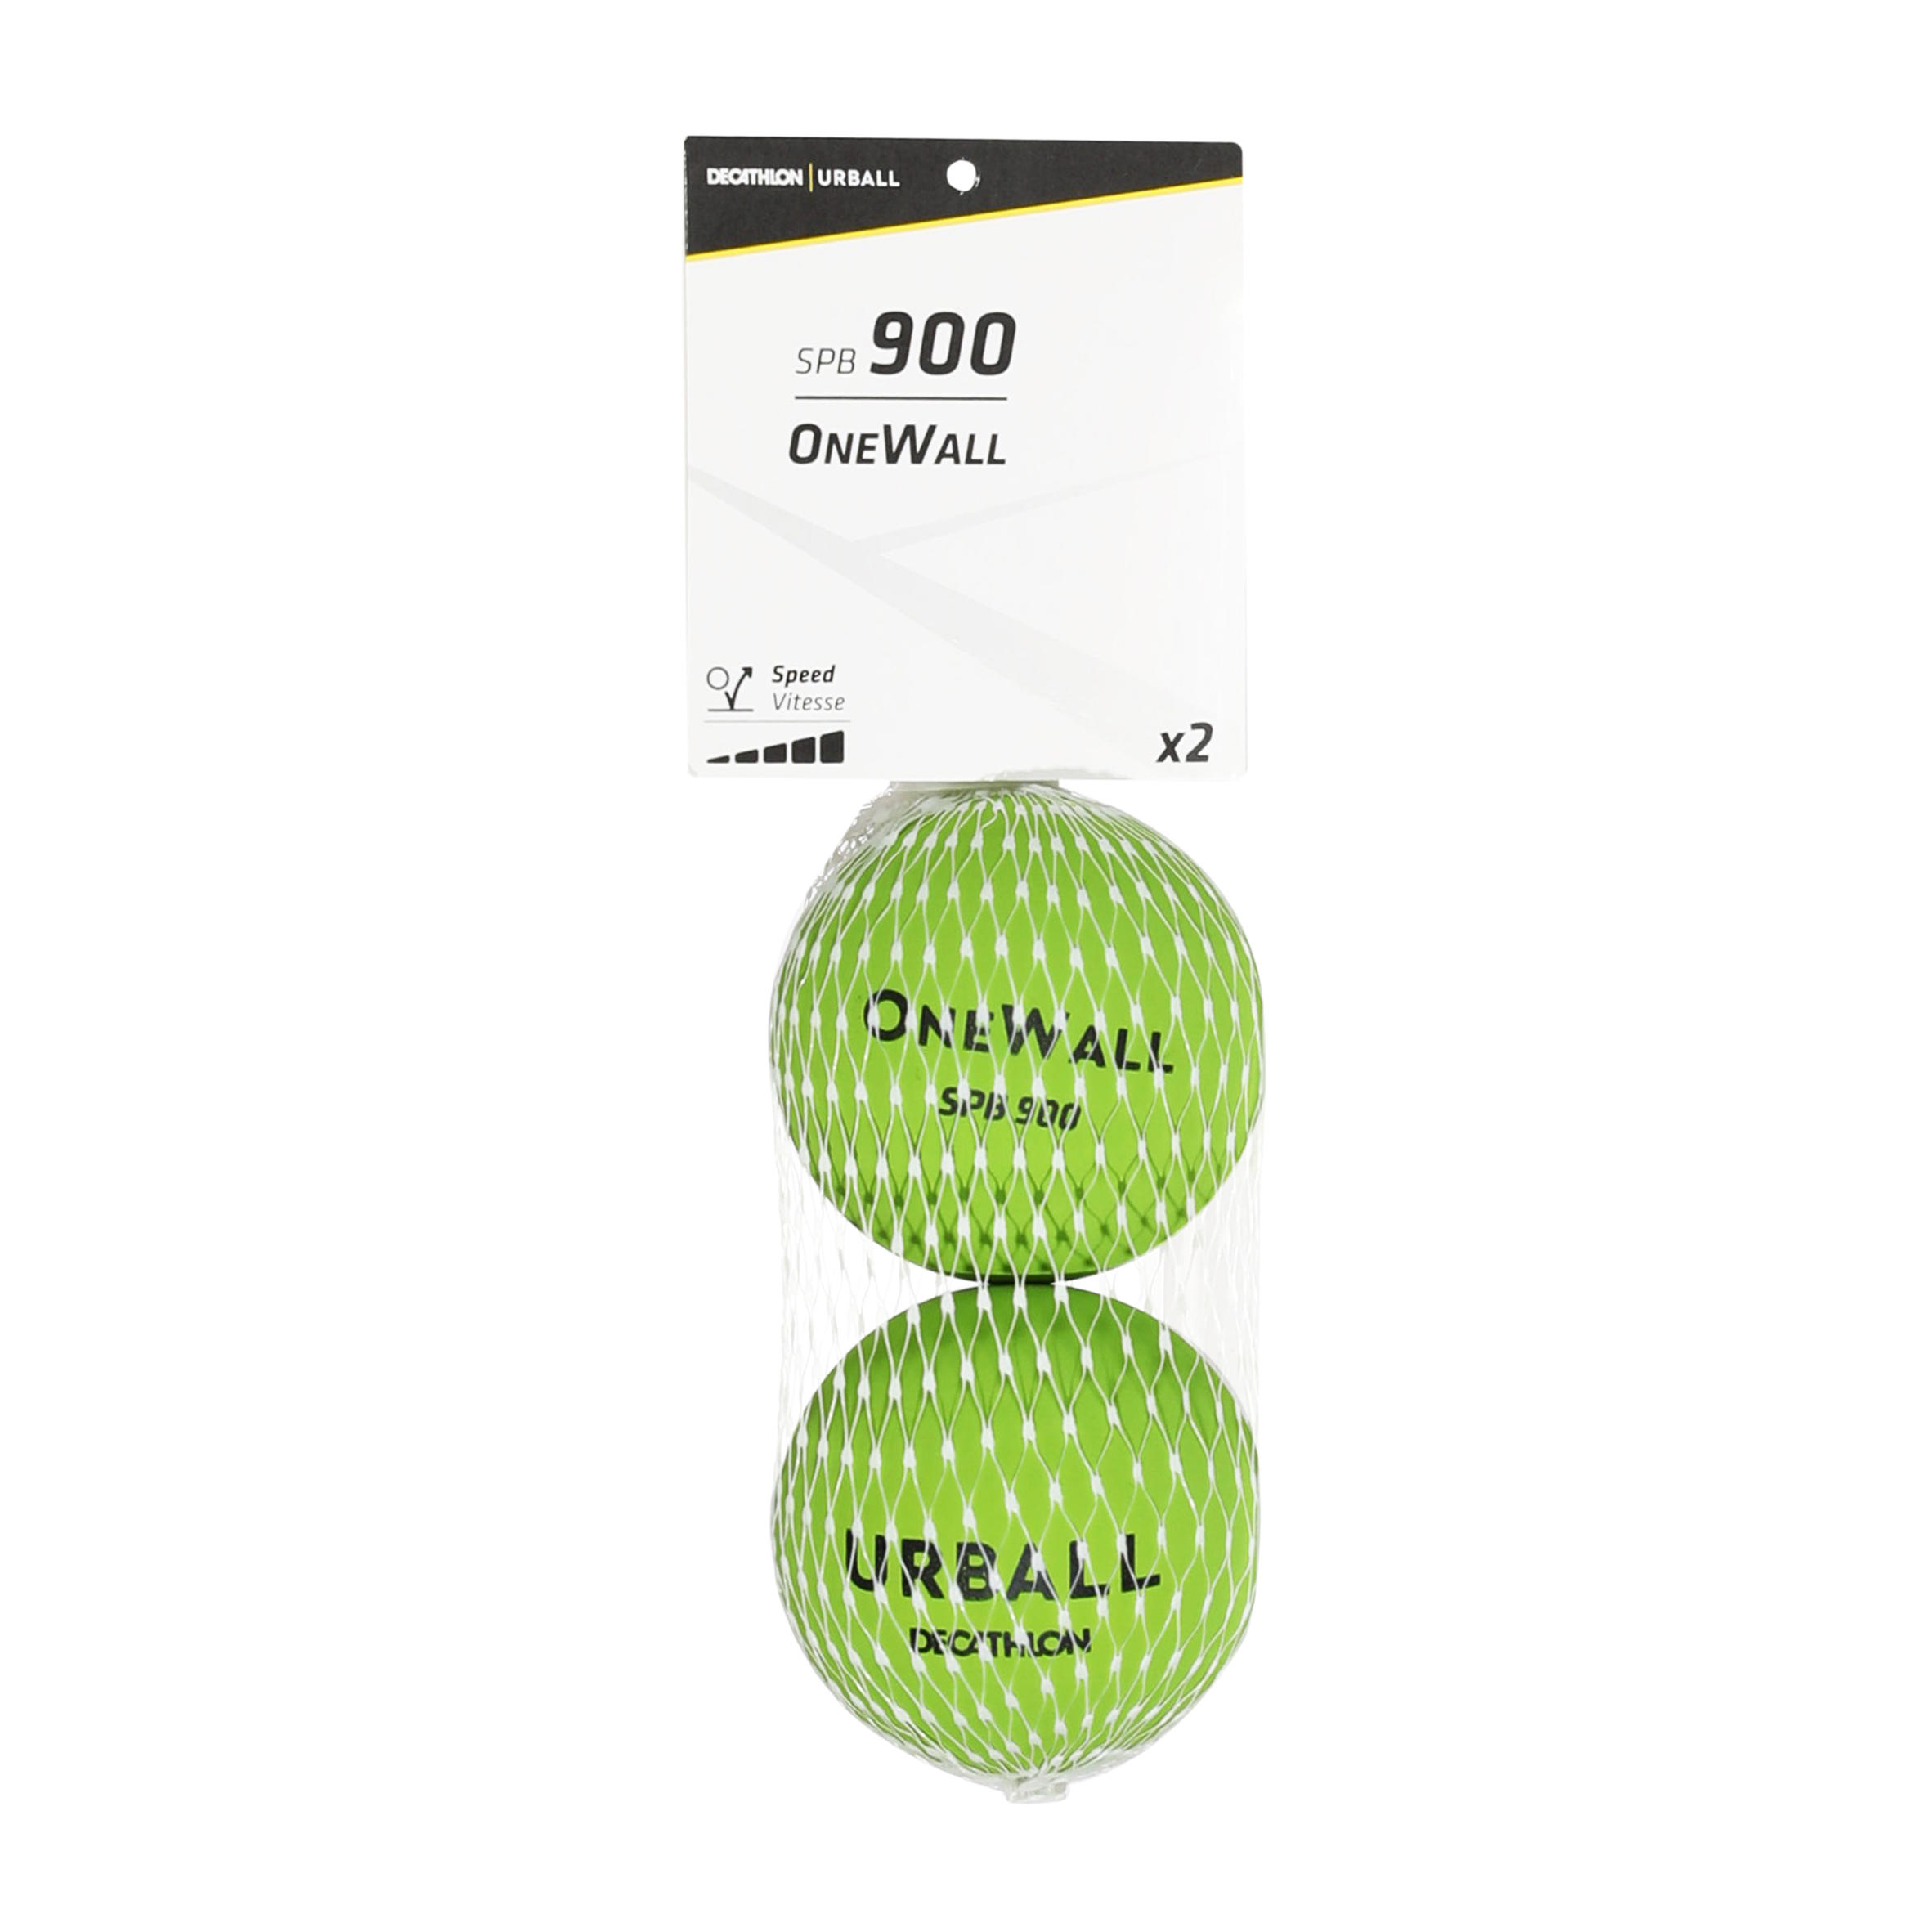 One Wall Balls SPB 900 Two-Pack - Green 4/6